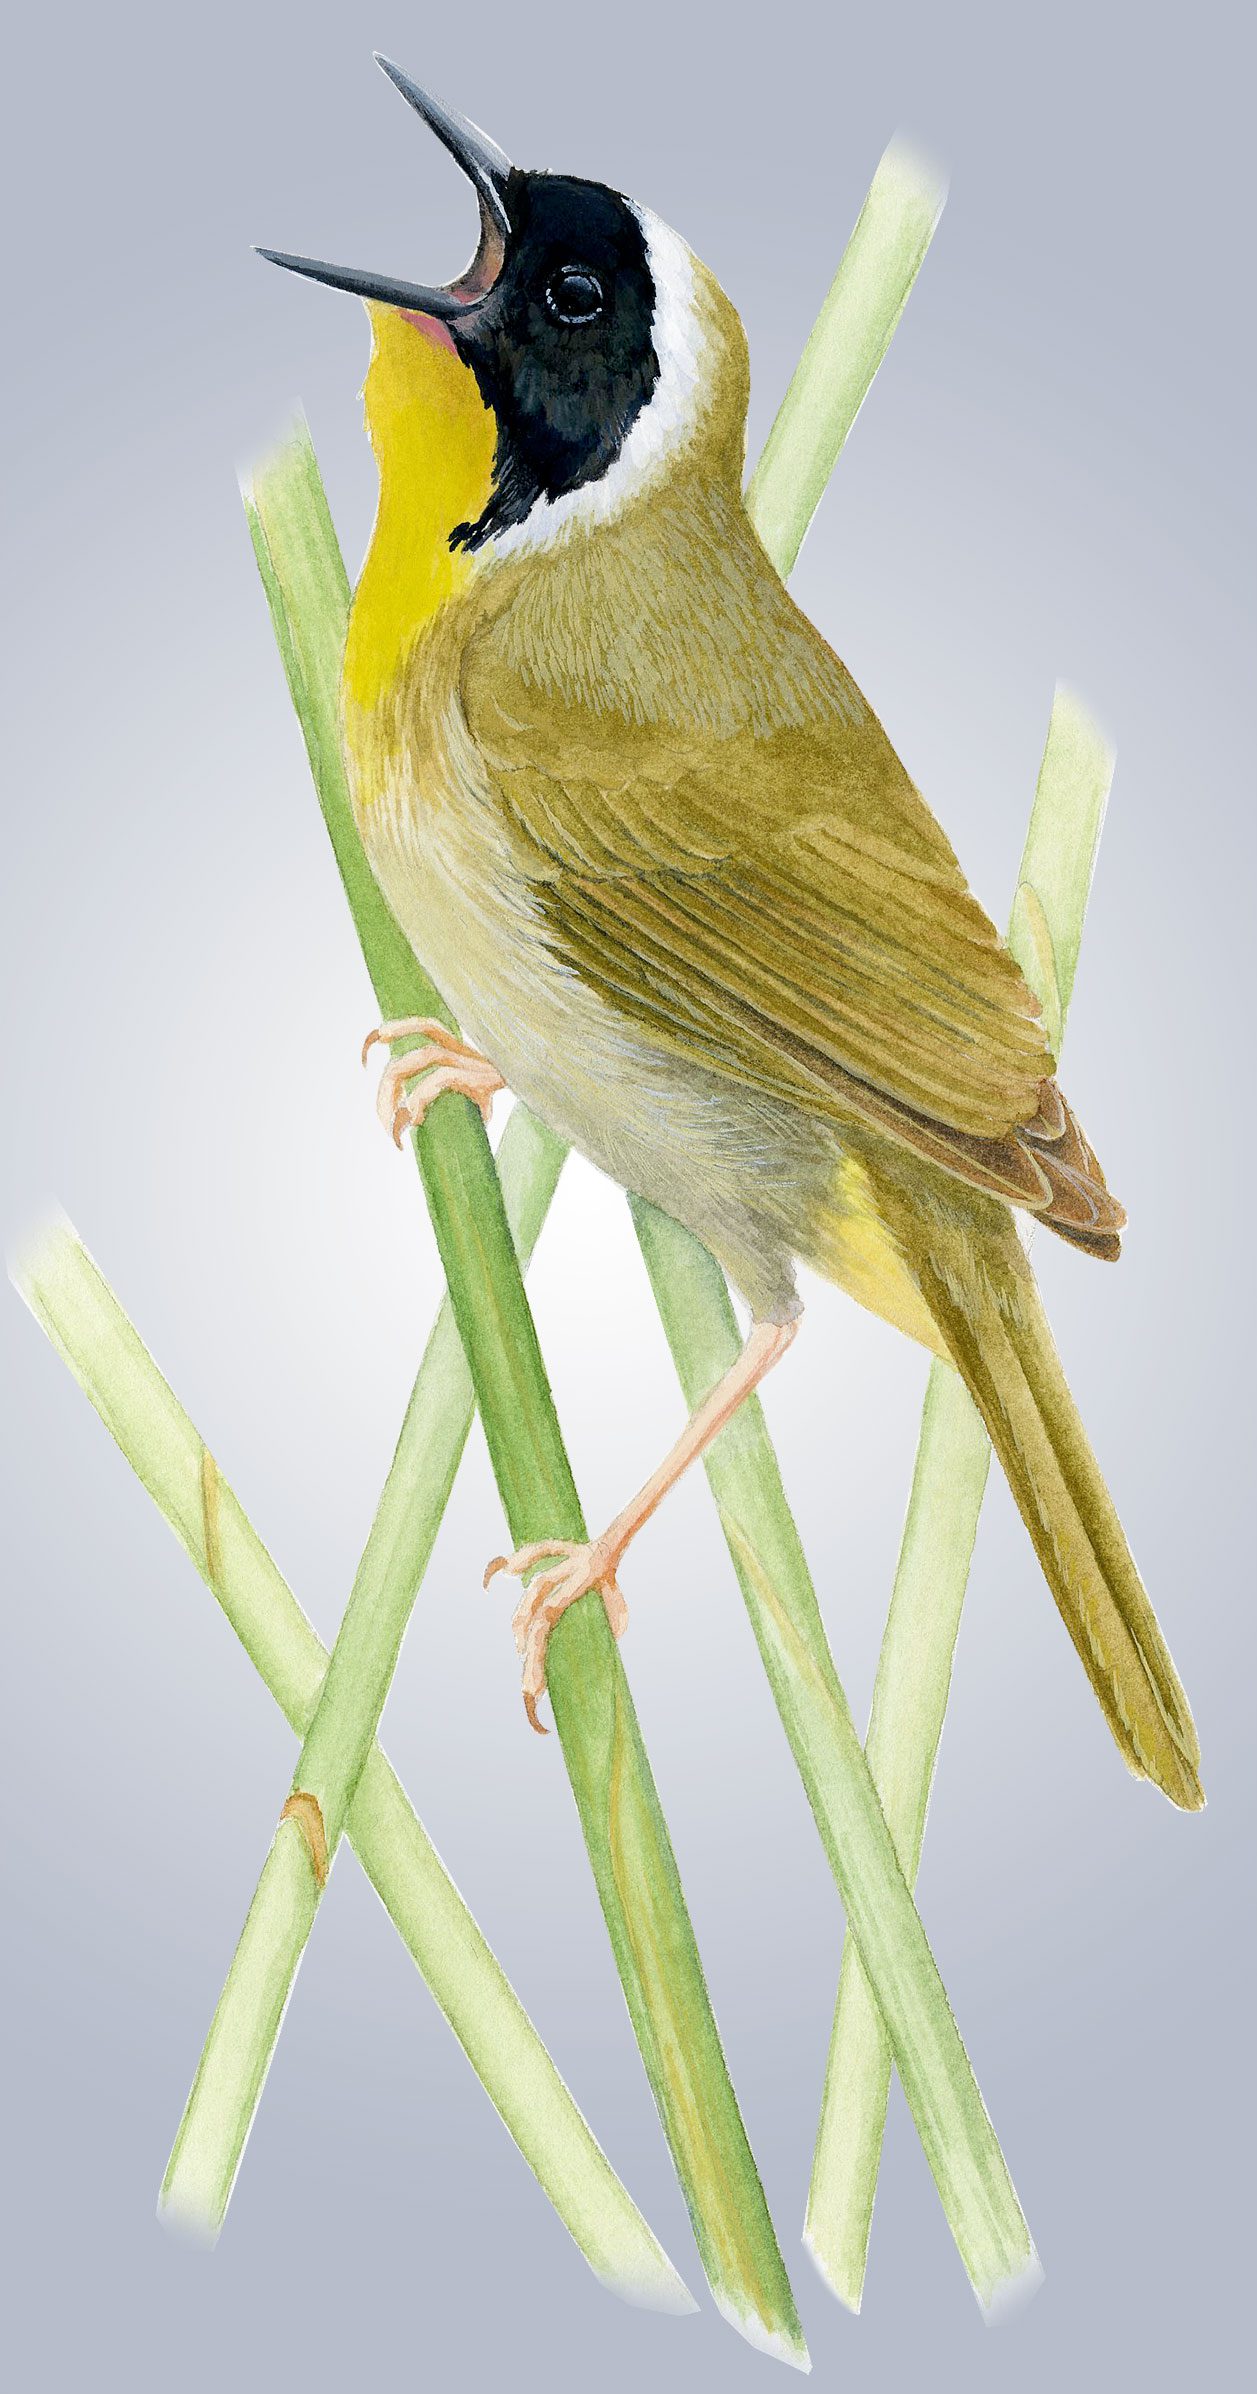 Common Yellowthroat illustration by Bartels Science Illustrator Jessica French